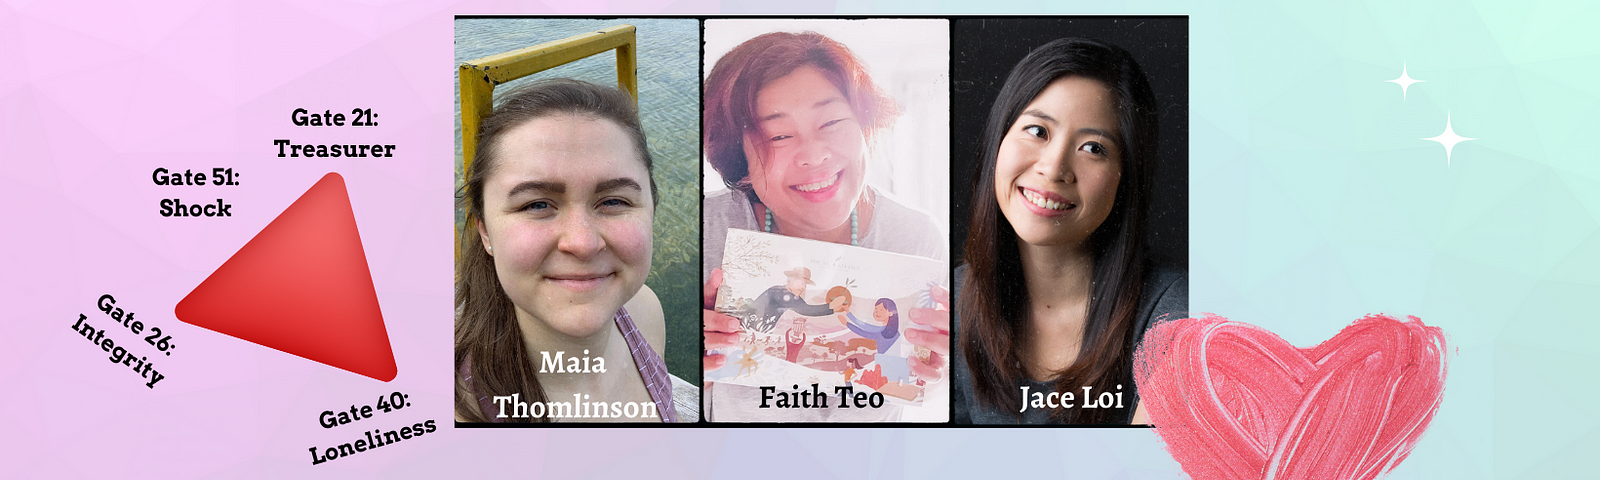 A Poster with headshots of my 3 interviewees — Maia Thomlinson, Faith Teo, and Jace Loi, with an illustration of the Will Center as a red triangle, and a red heart symbol.